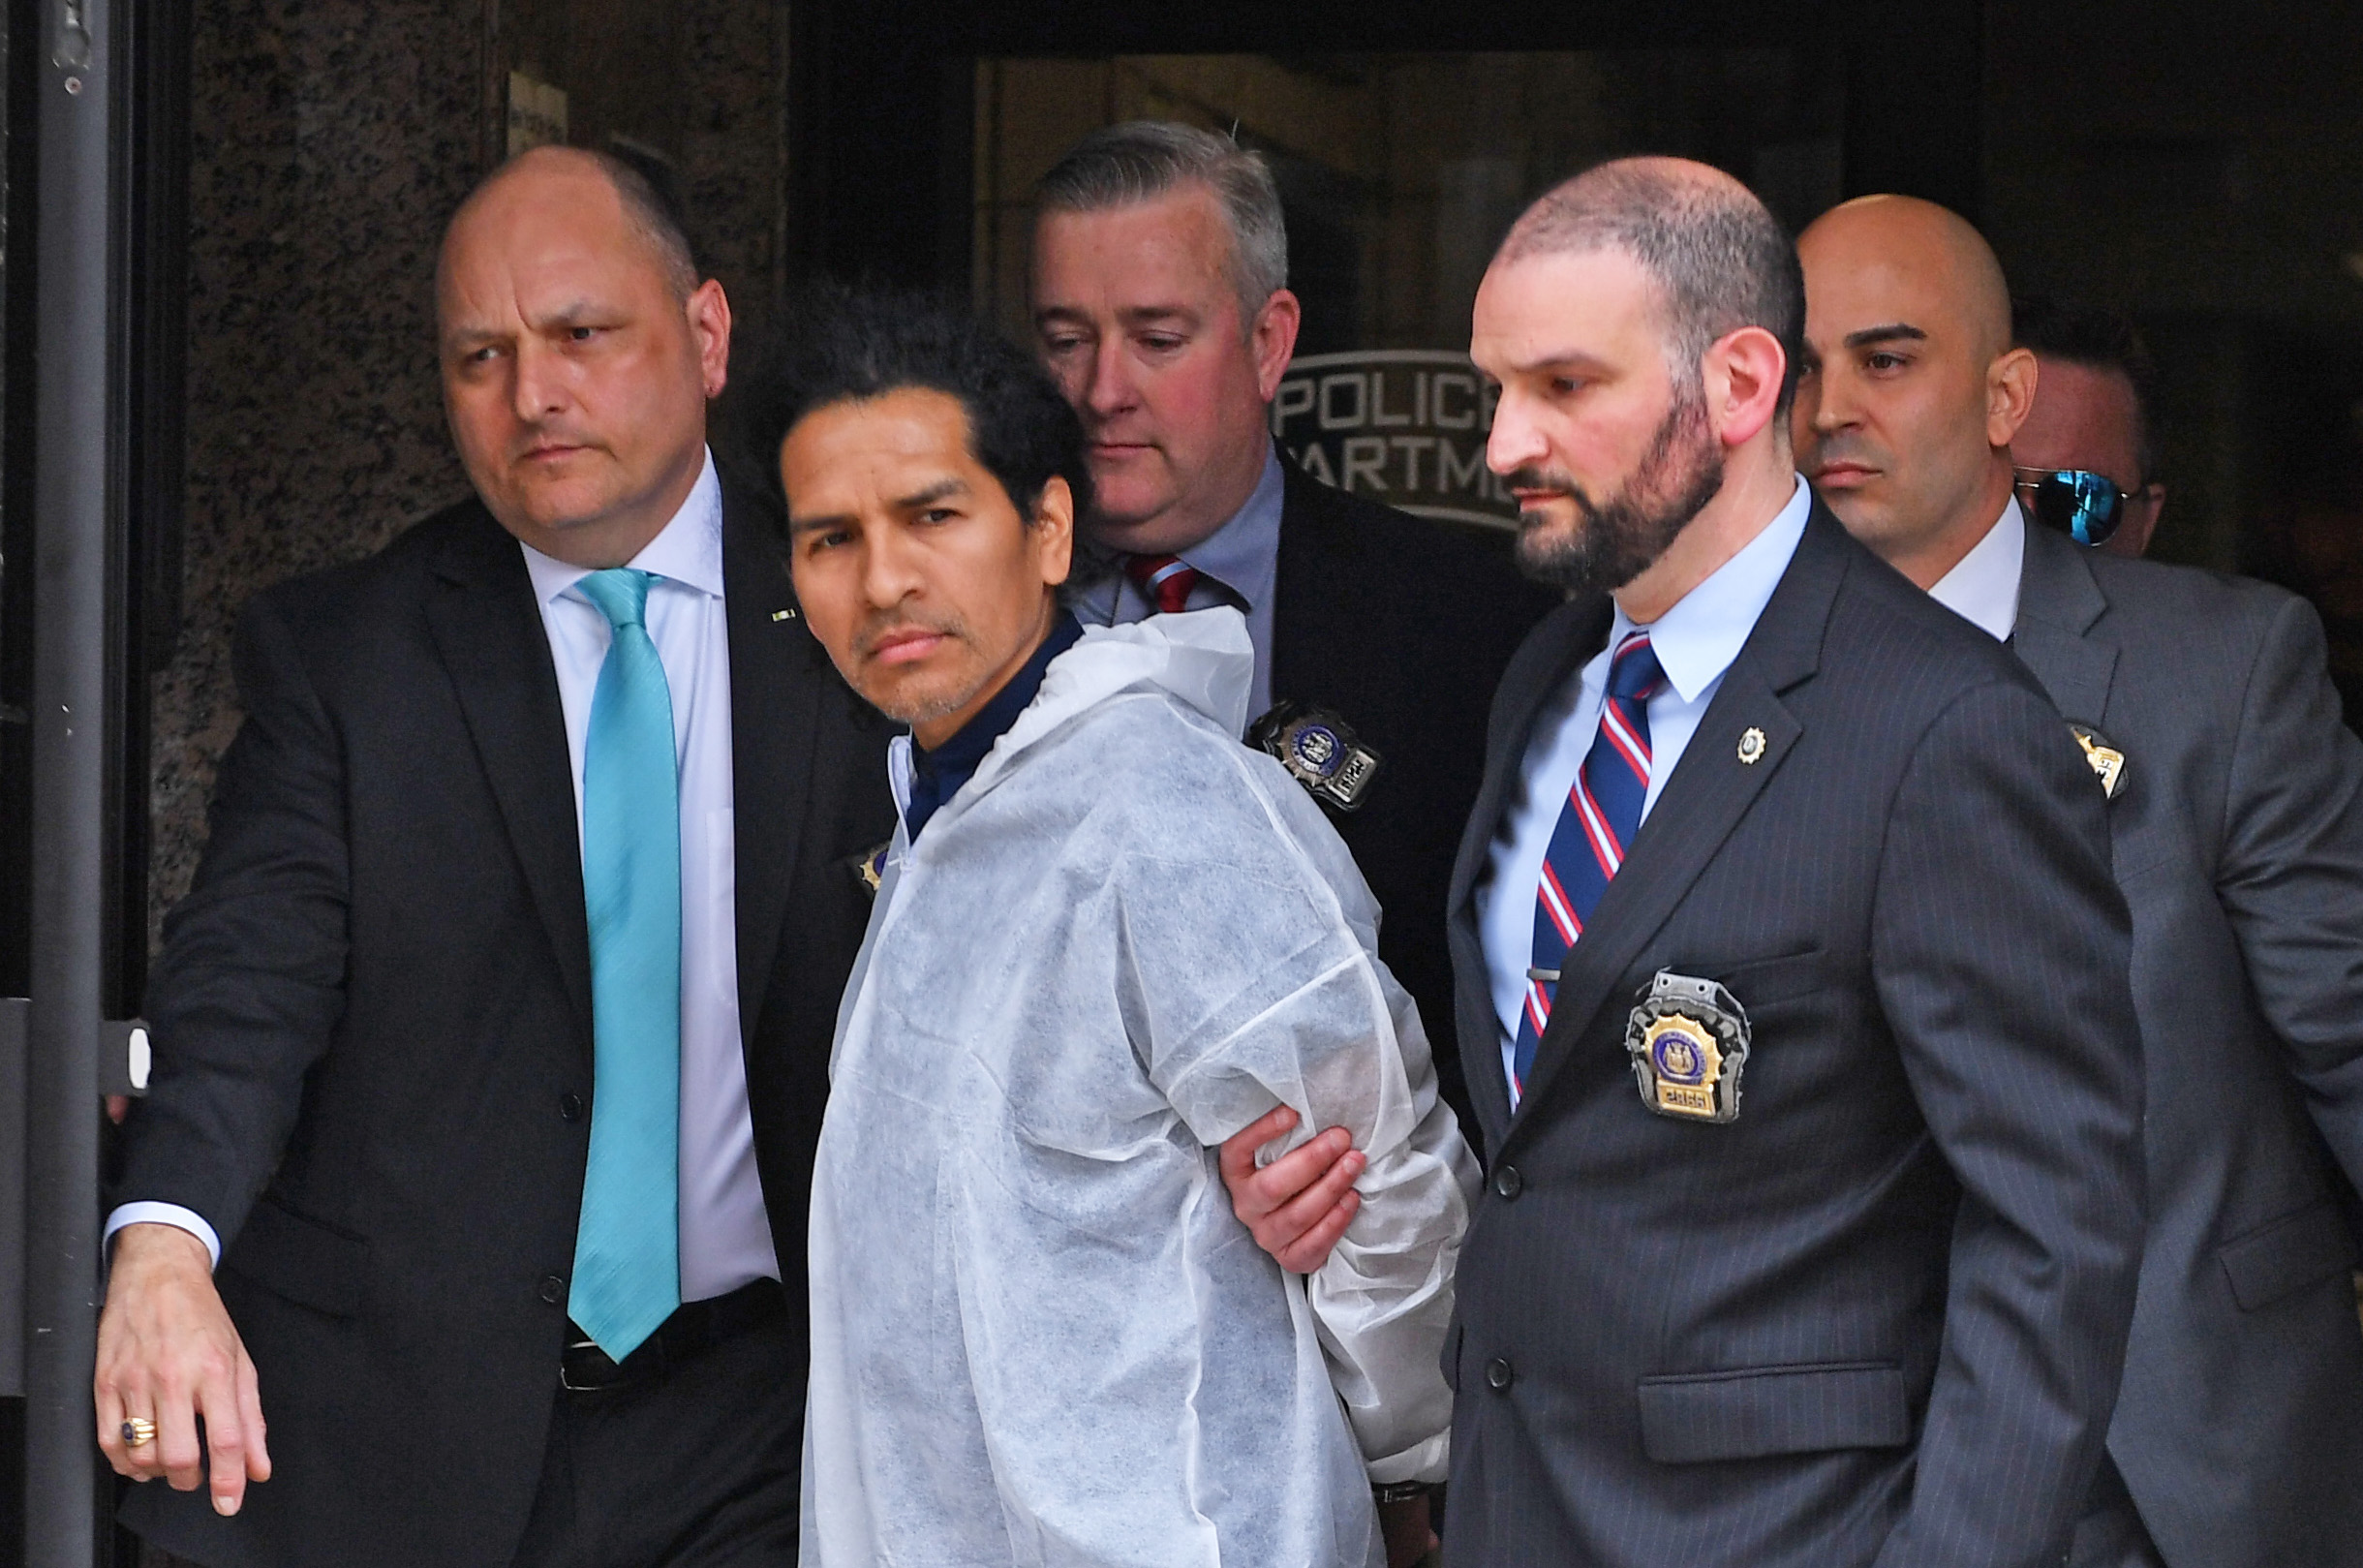 PHOTO: David Bonola, 44, suspect in the murder of Orsolya Gaal, is escorted by police, April 21, 2022, in New York City.